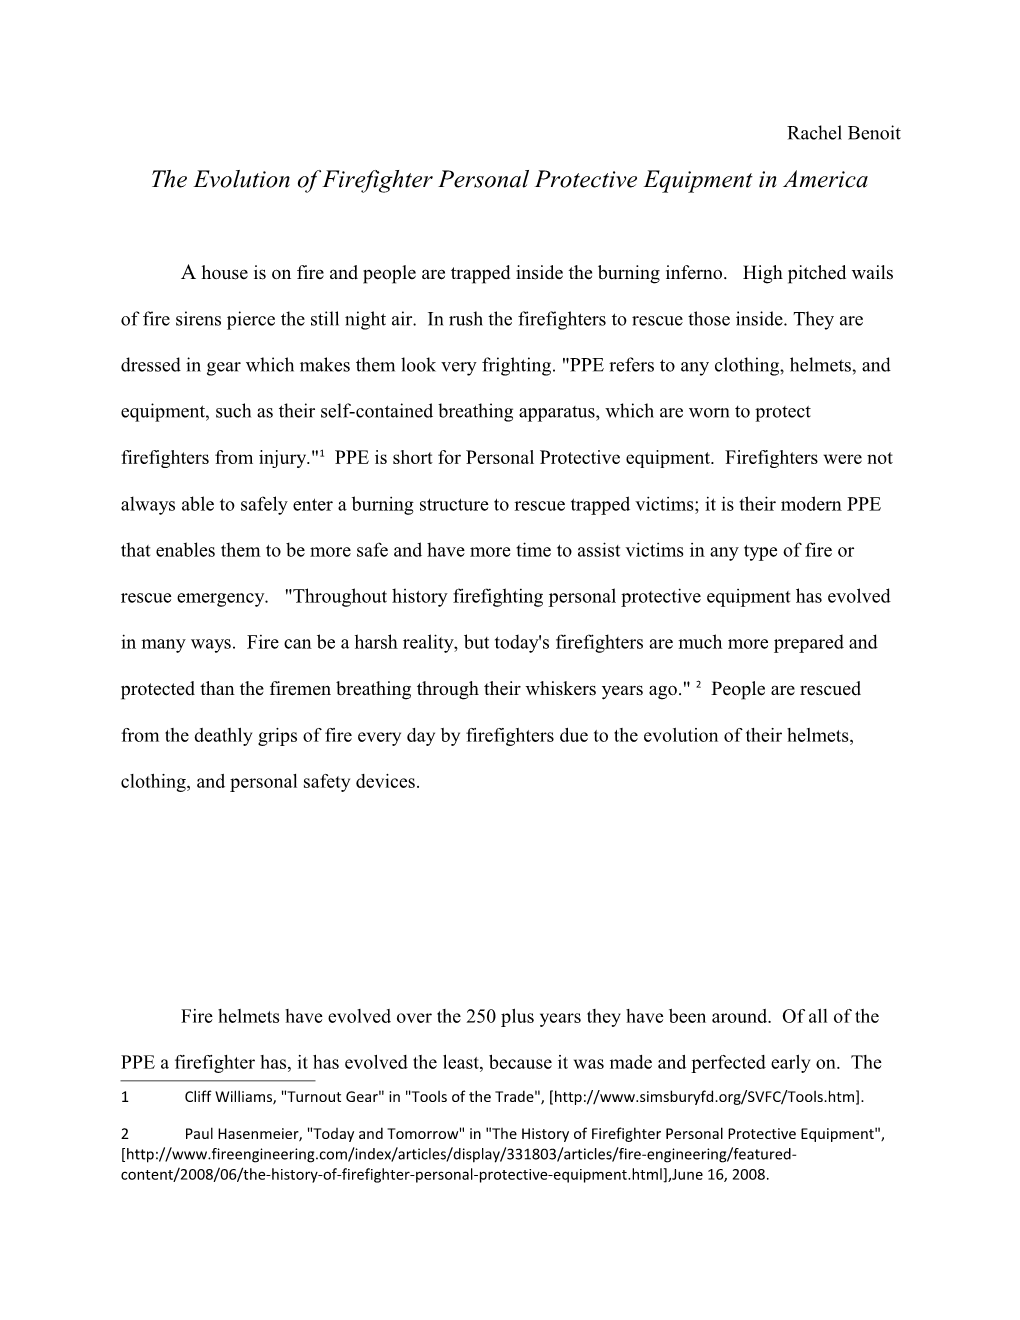 The Evolution of Firefighter Personal Protective Equipment in America